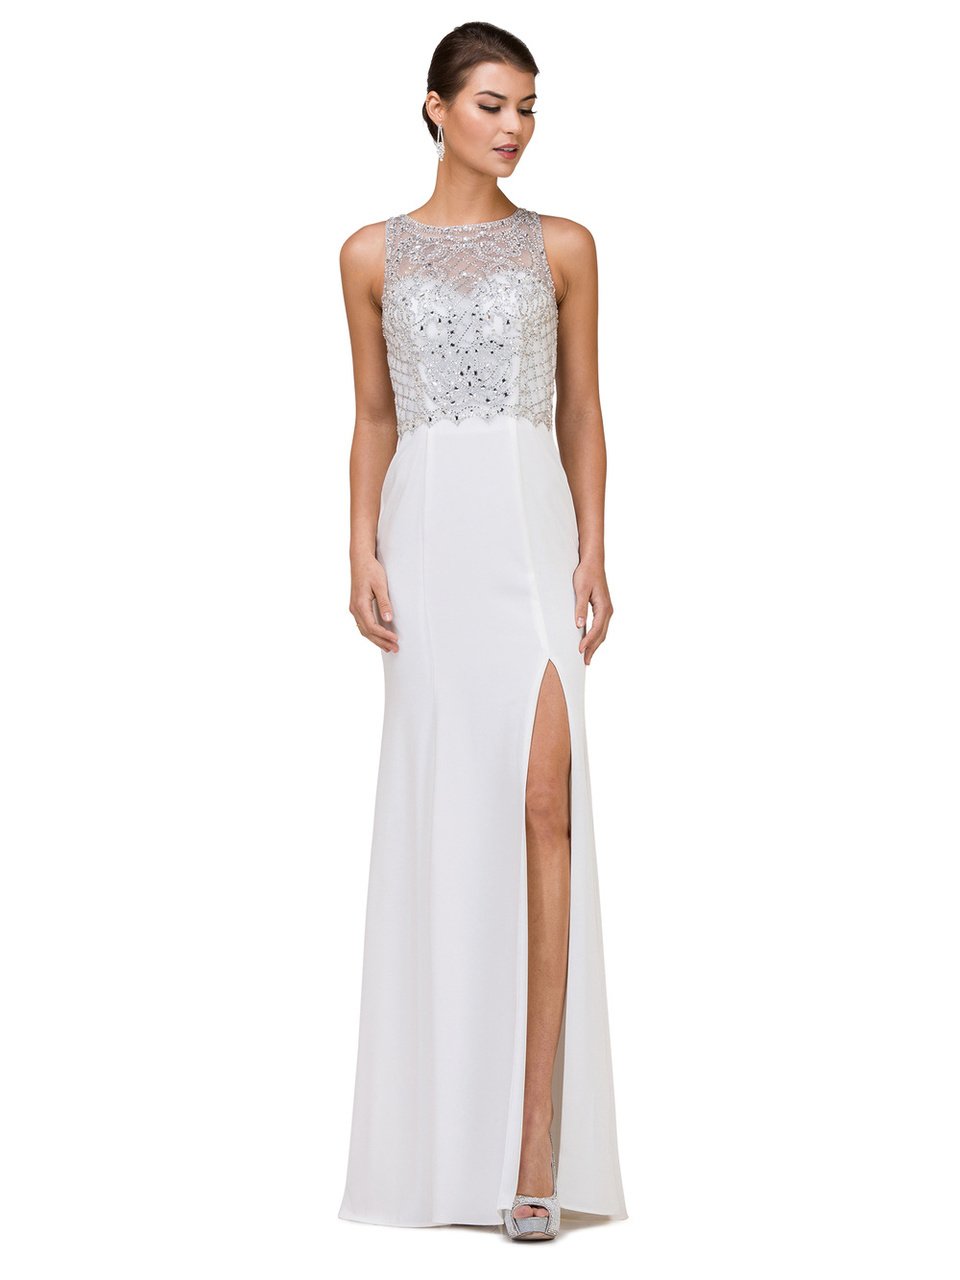 Image of Dancing Queen Bridal - 9964 Ornate Cutout Illusion Gown